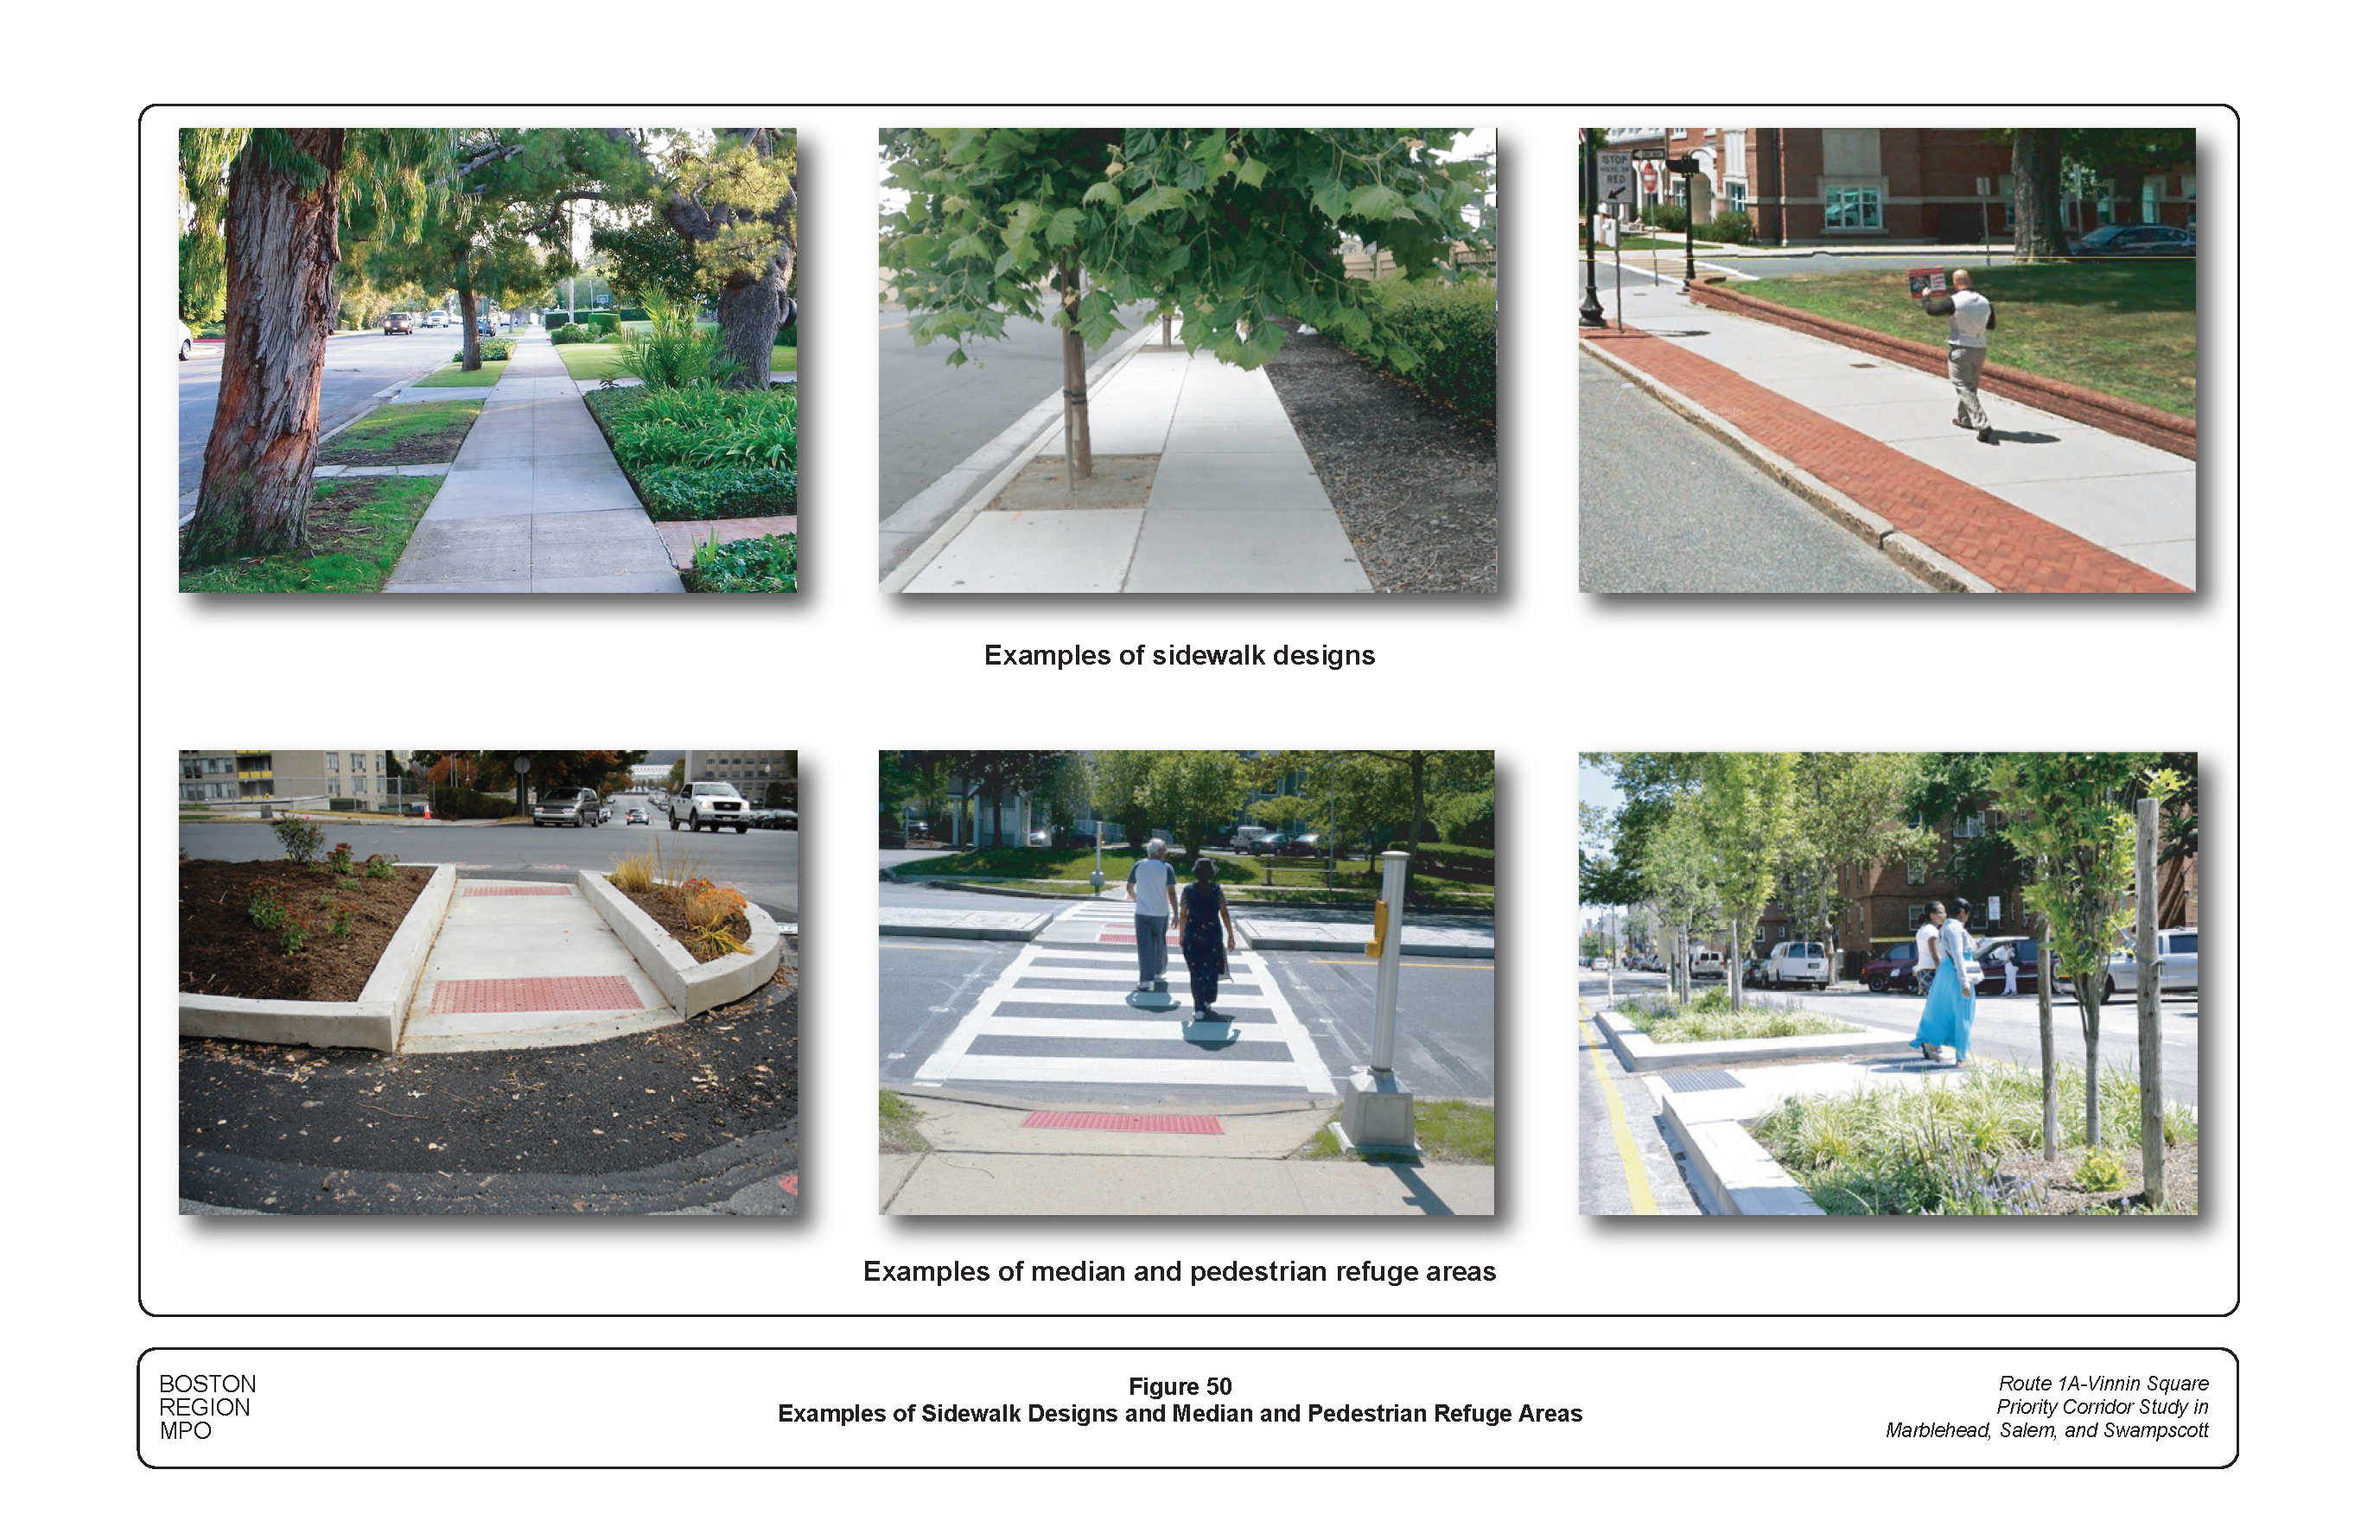 FIGURE 50. Examples of Sidewalk Designs and Median and Pedestrian Refuge Areas.Figure 50 contains six photographs showing examples of sidewalk designs and median and pedestrian refuge areas.